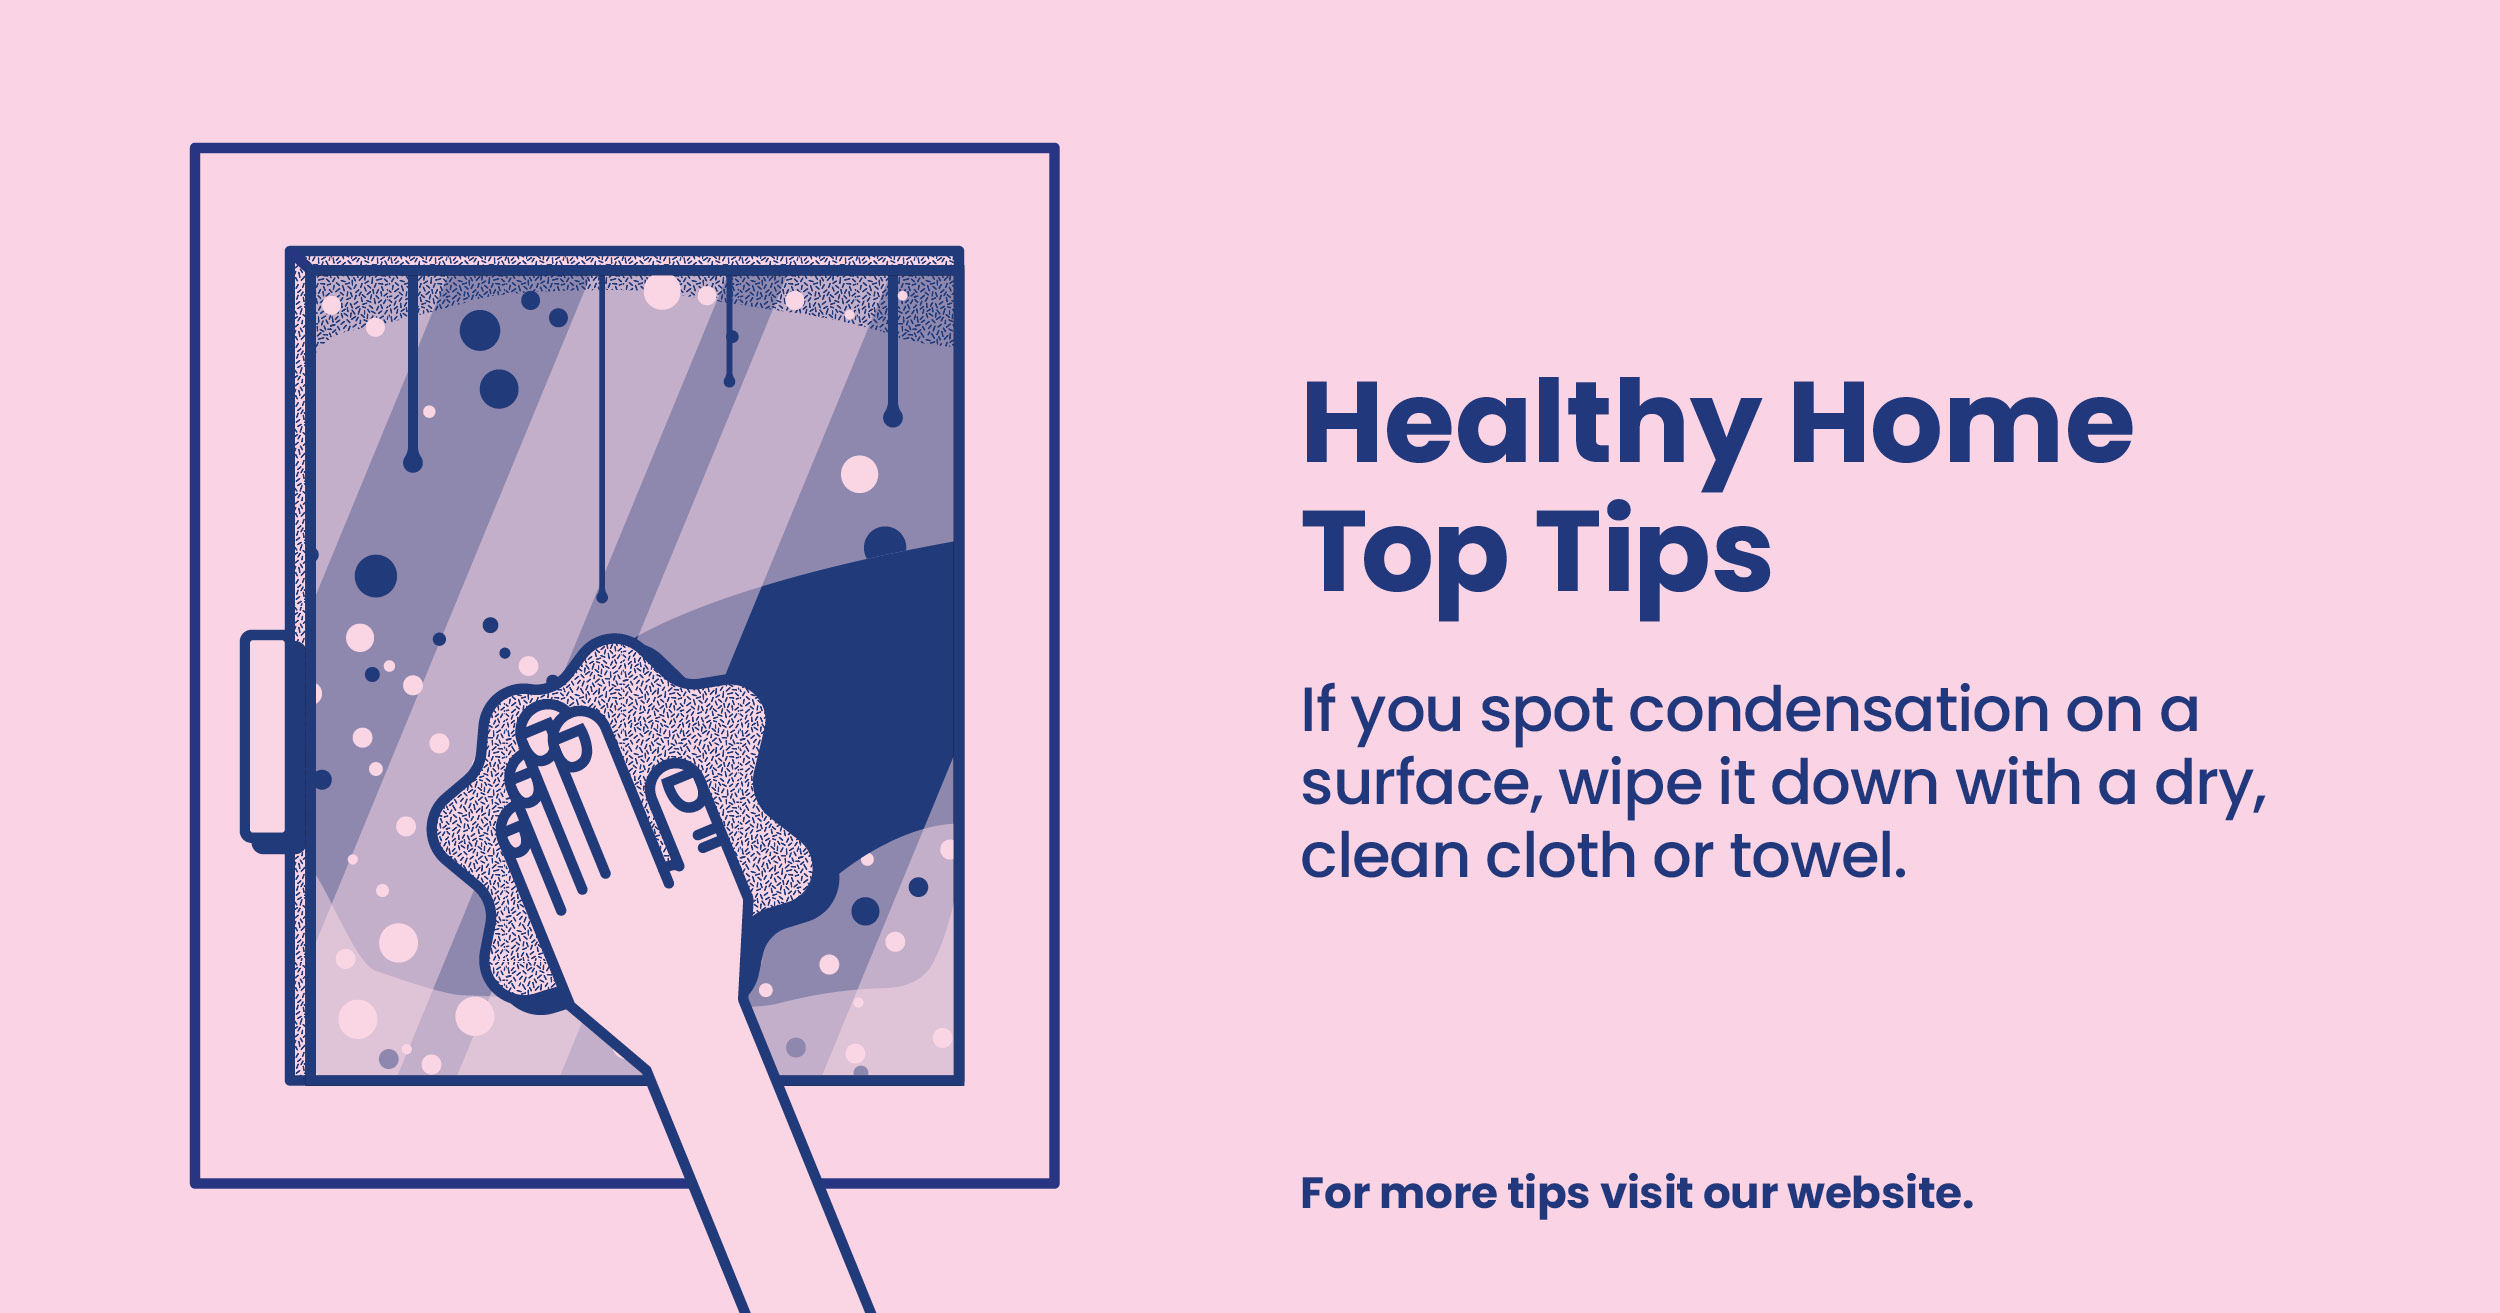 Healthy homes top tips